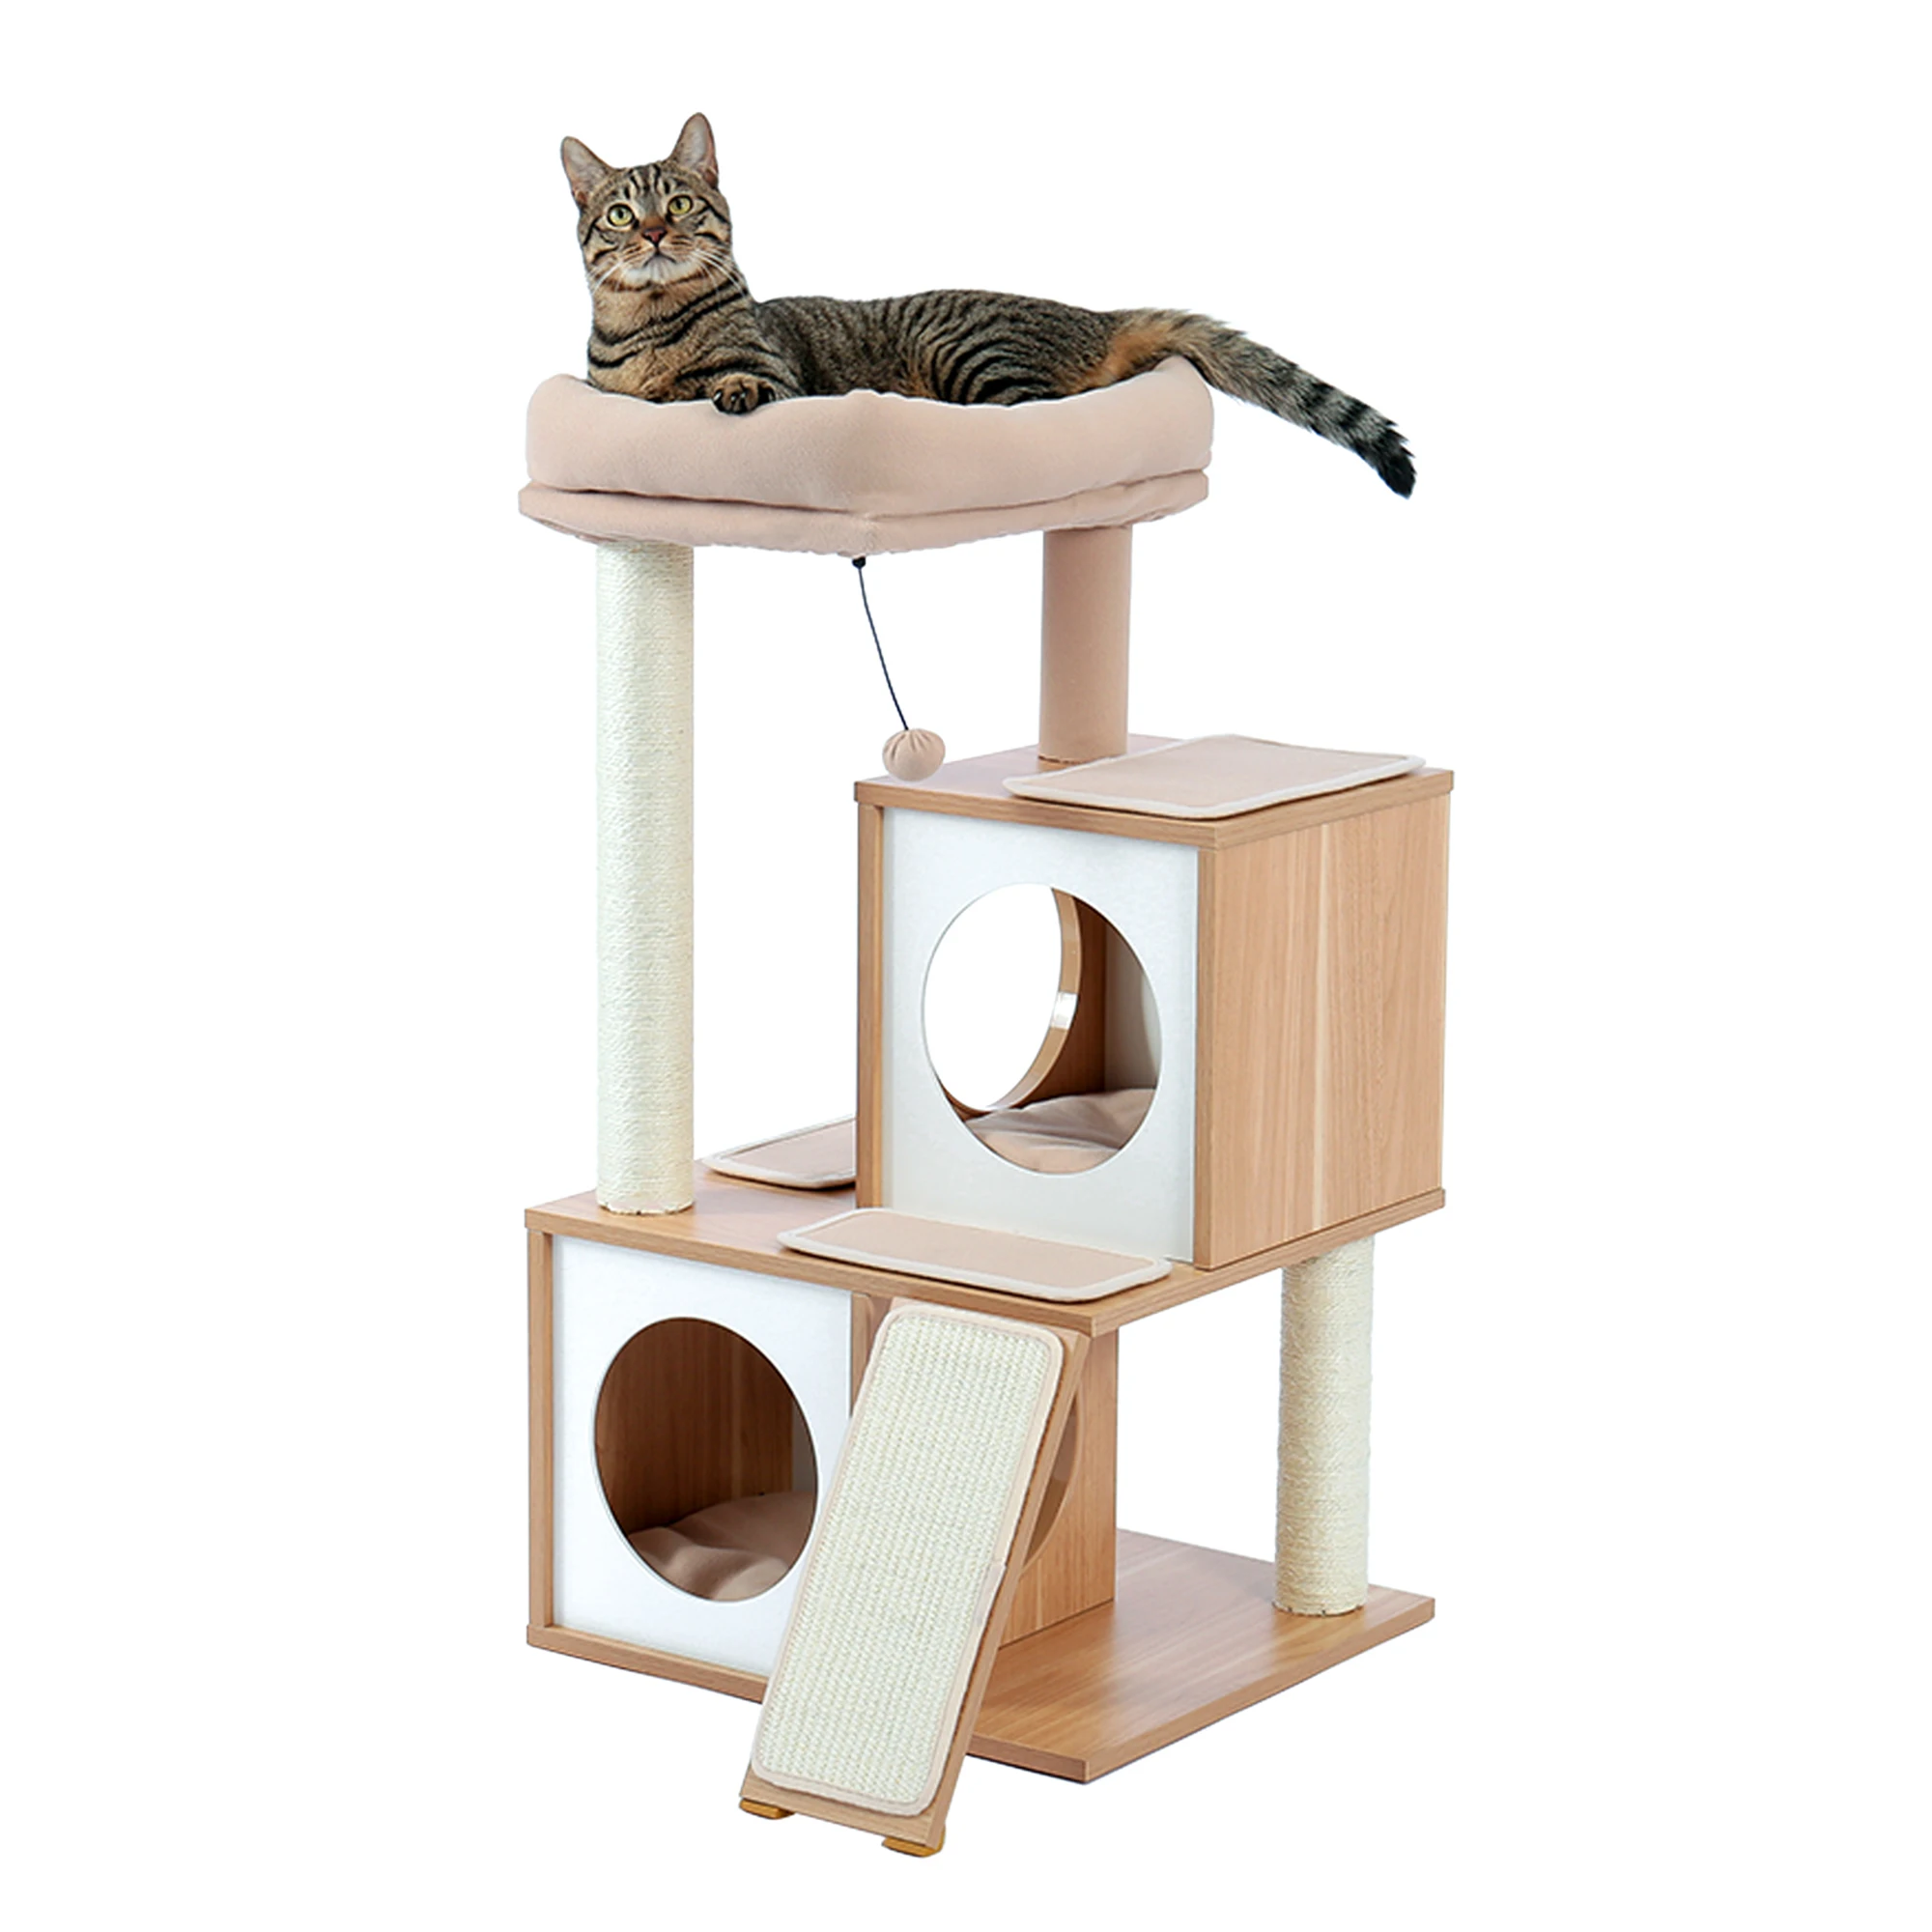 

Cat Tree Multi-Level Cat Tower Furniture with Spacious Perch, Fully Wrapped Sisal Scratching Posts and Replaceable Dangling Ball, Beige